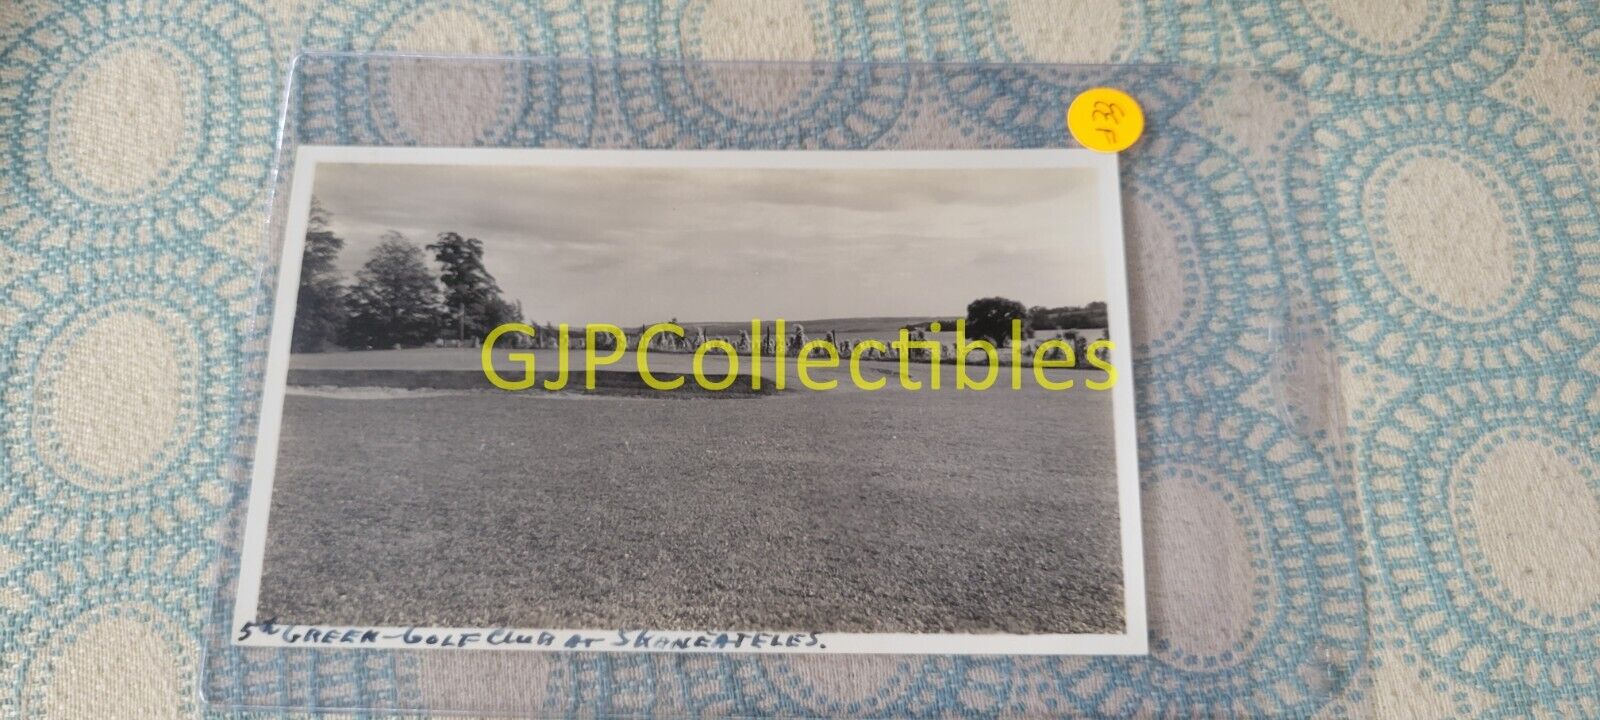 EEF VINTAGE PHOTOGRAPH Spencer Lionel Adams SKANEATELES NY 5TH GREEN GOLF COURSE